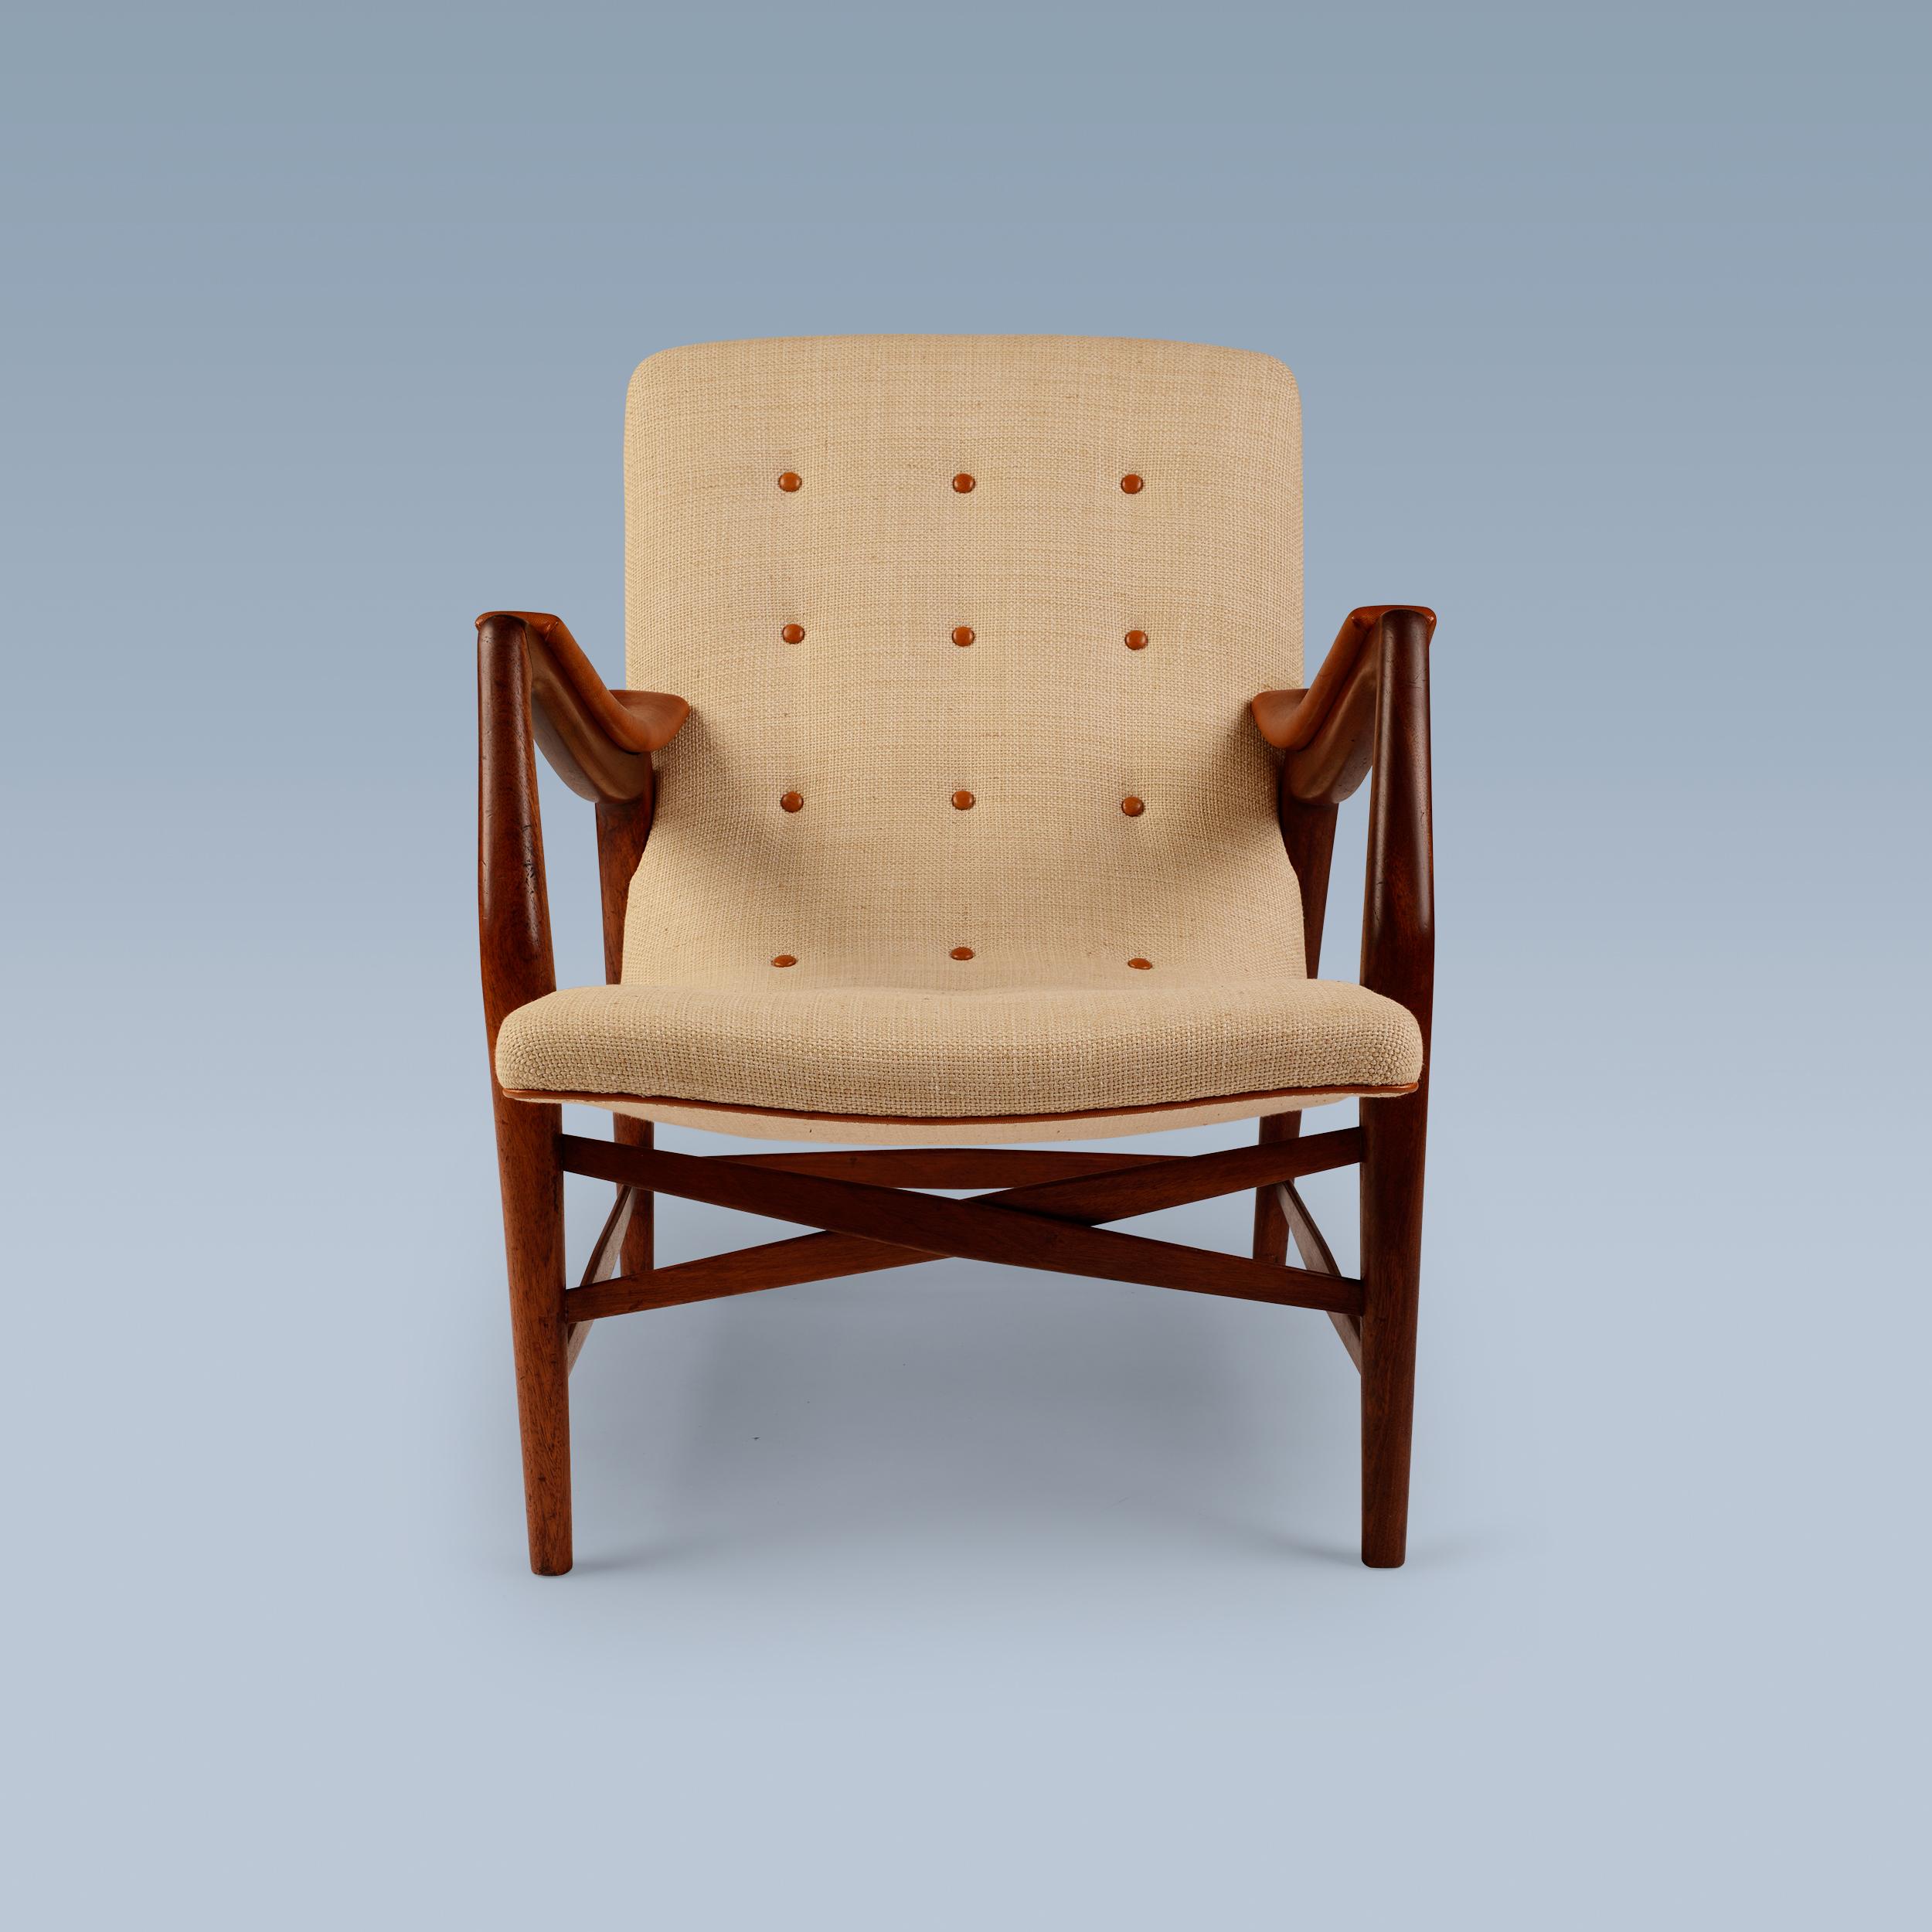 Teak chair with curvy seat upholstered with light fabric and leather details For Sale 8